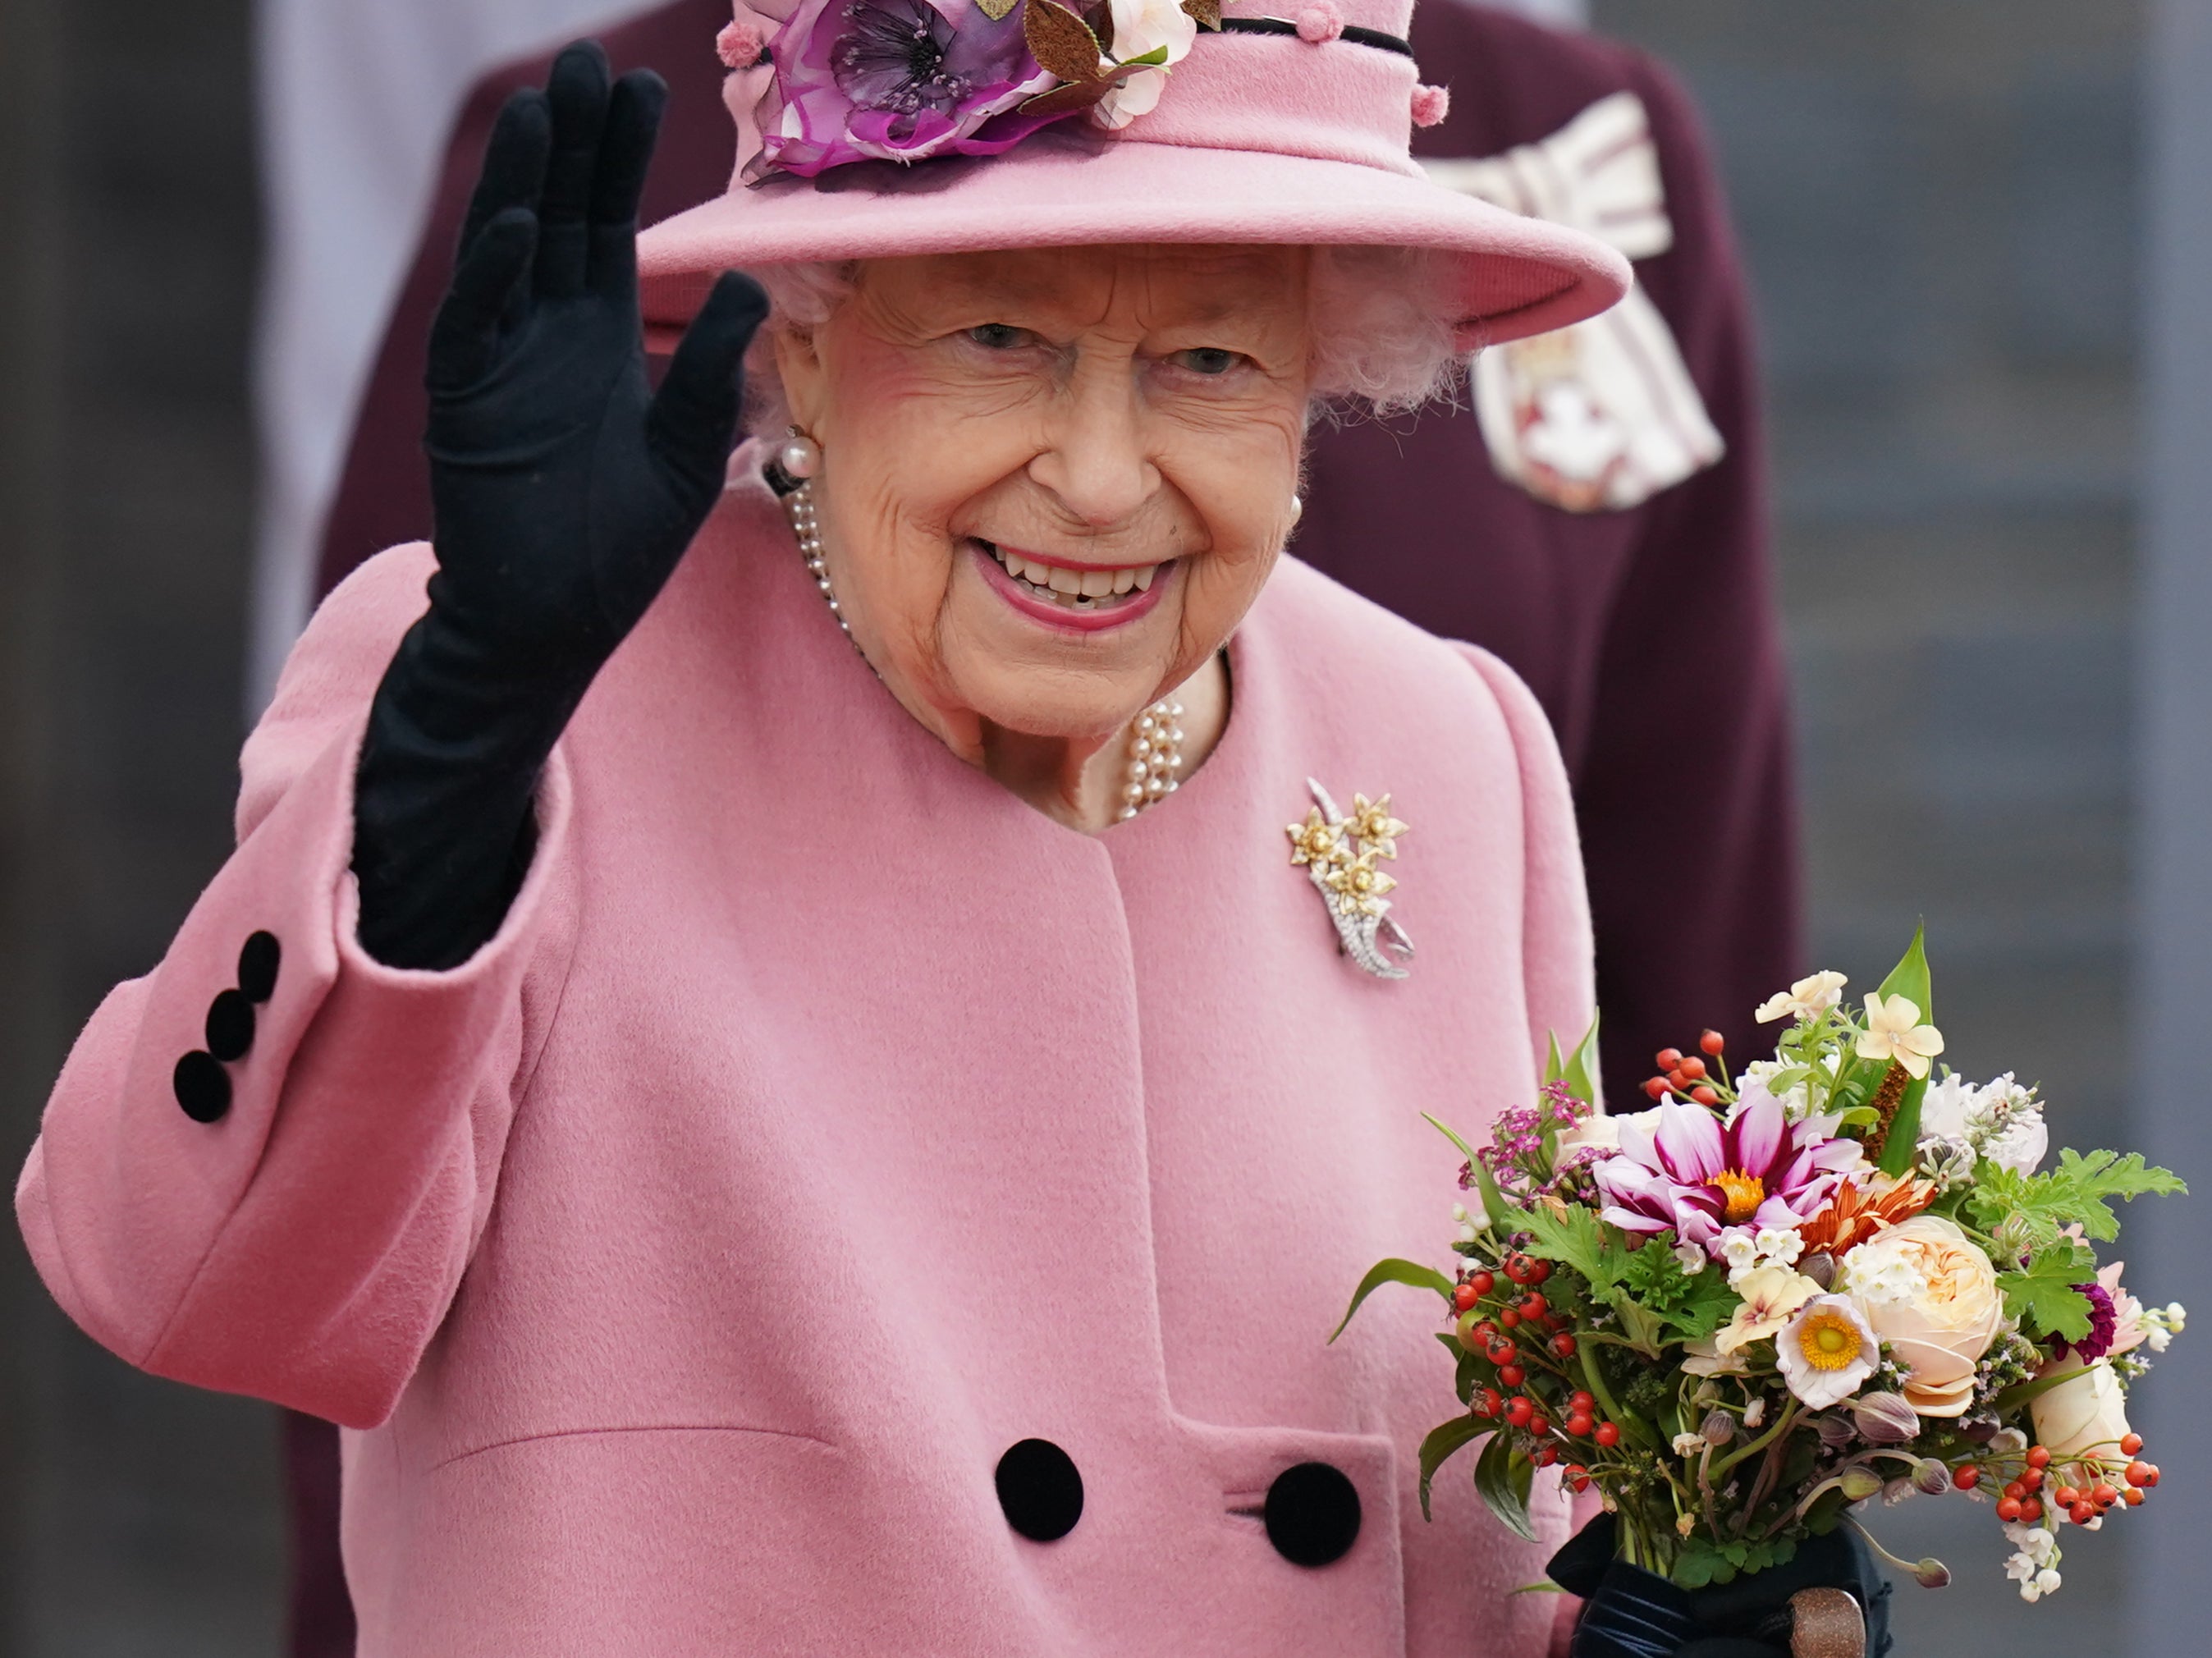 The Queen has been advised by her doctors to give up alcohol